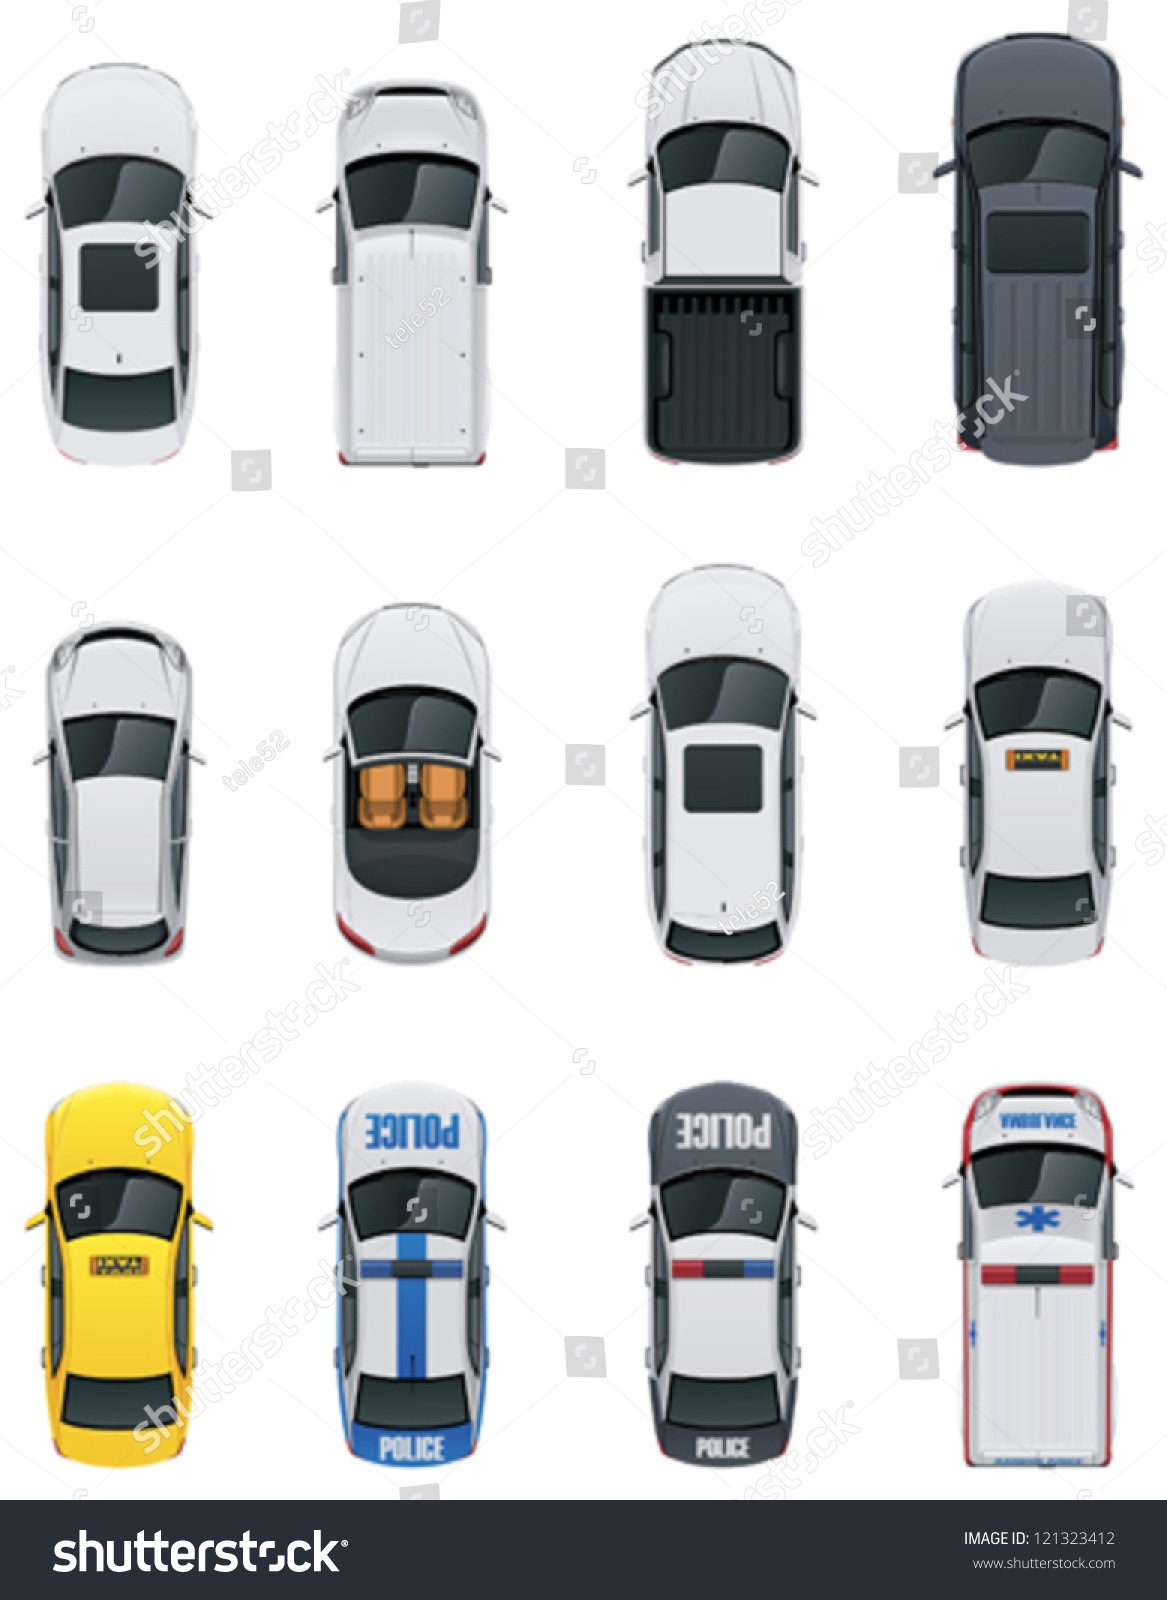 SVG of Vector cars icon set. From above view. Includes sedan, commercial van, truck, wagon, cabrio, sport car, hatchback, taxi, police and ambulance vehicles svg